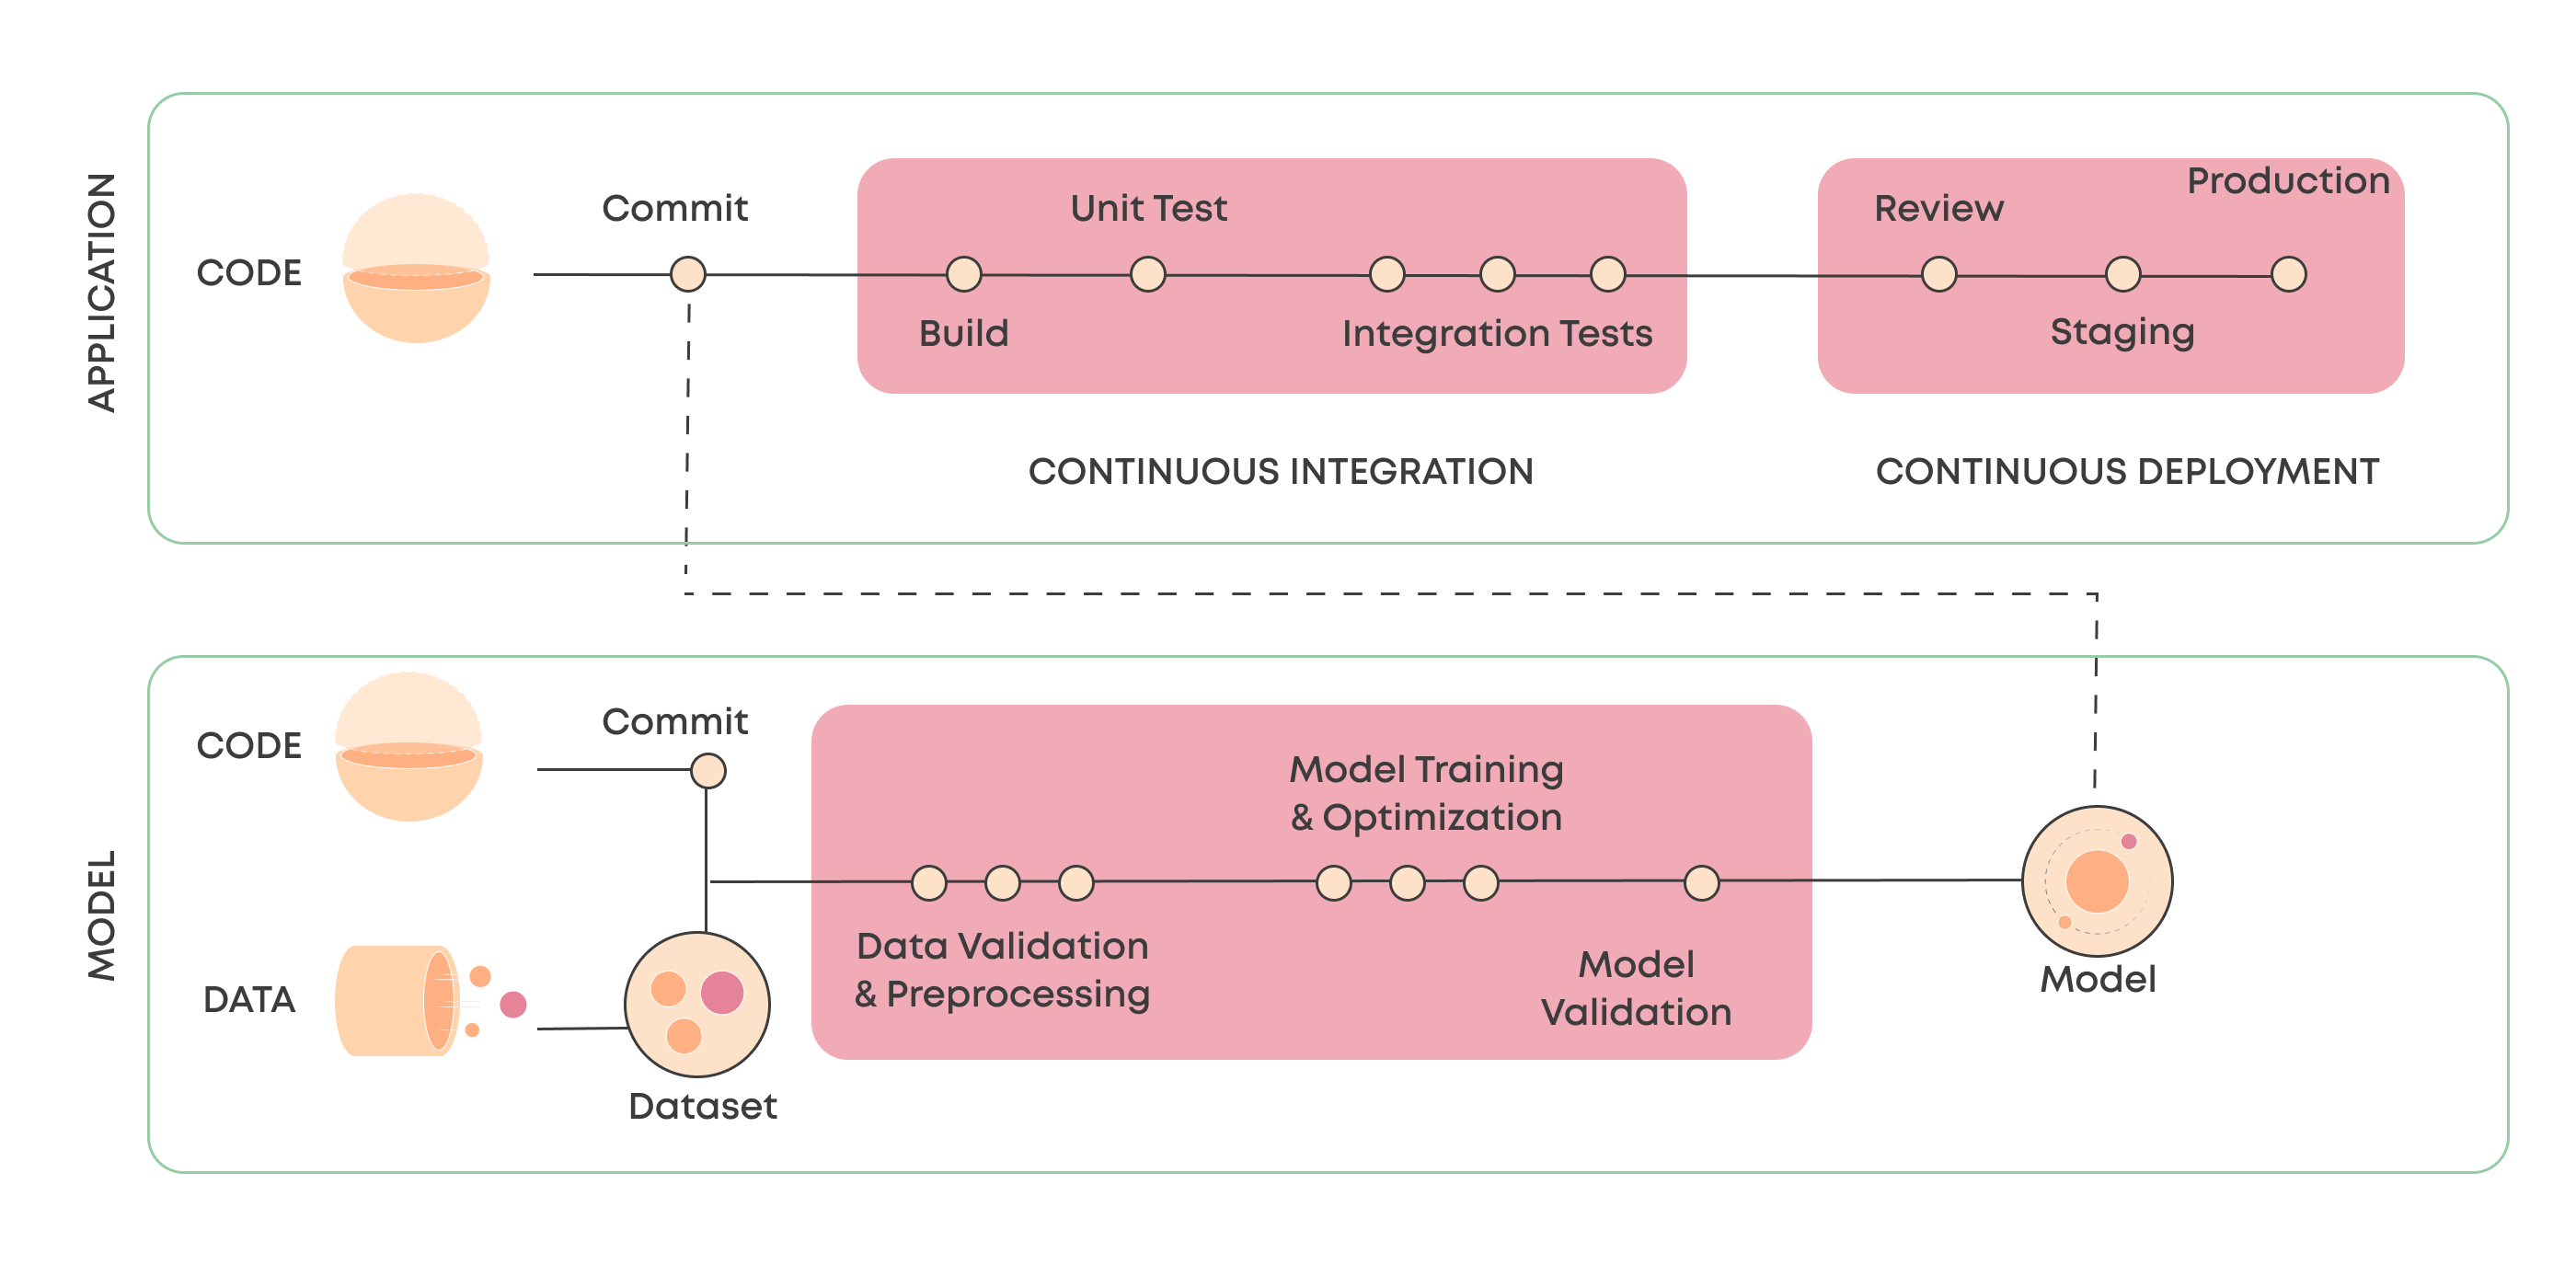 A typical machine learning CI/CD integrated with a software CI/CD